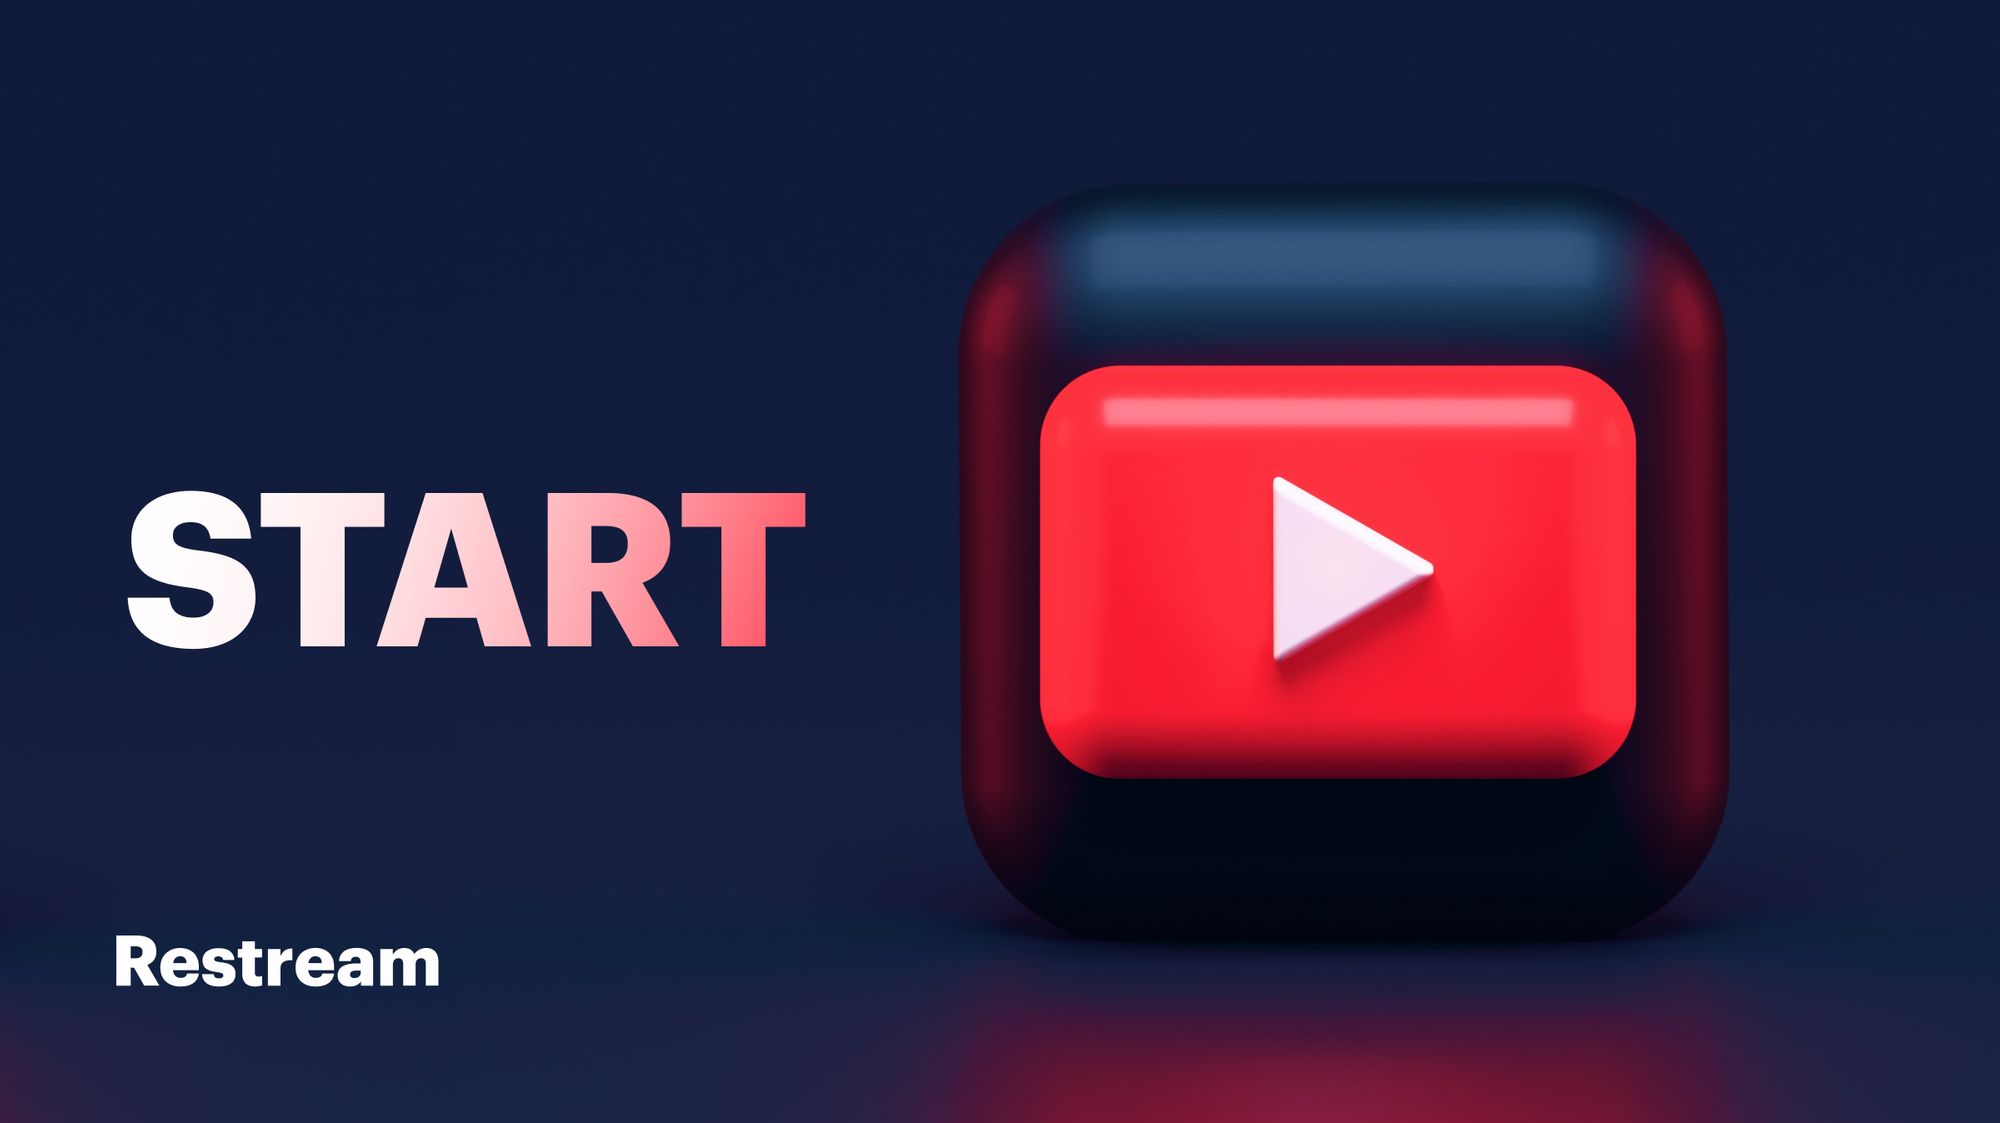 The Ultimate Guide to Starting a YouTube Channel